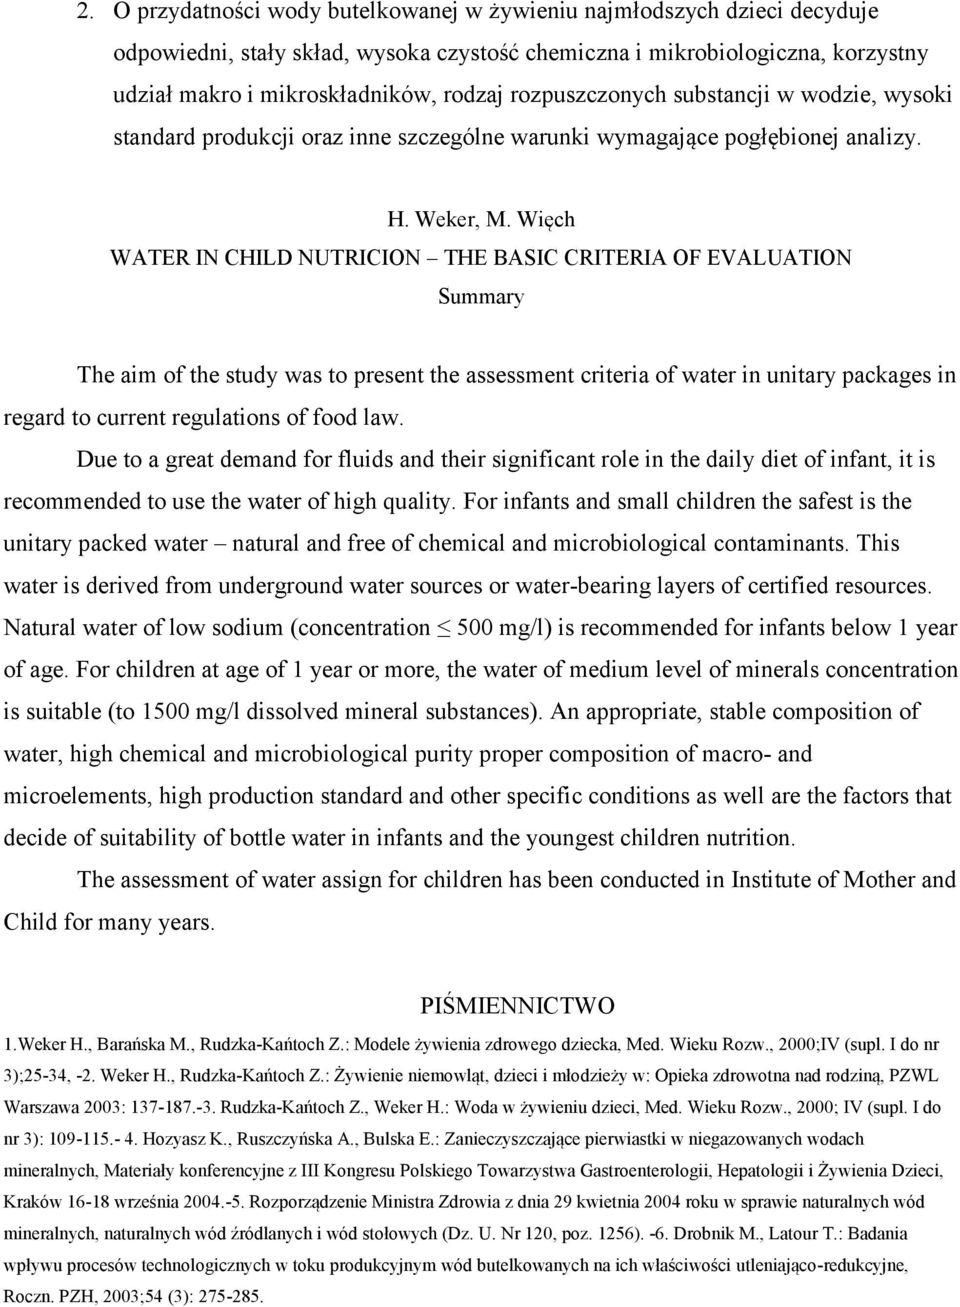 Więch WATER IN CHILD NUTRICION THE BASIC CRITERIA OF EVALUATION Summary The aim of the study was to present the assessment criteria of water in unitary packages in regard to current regulations of